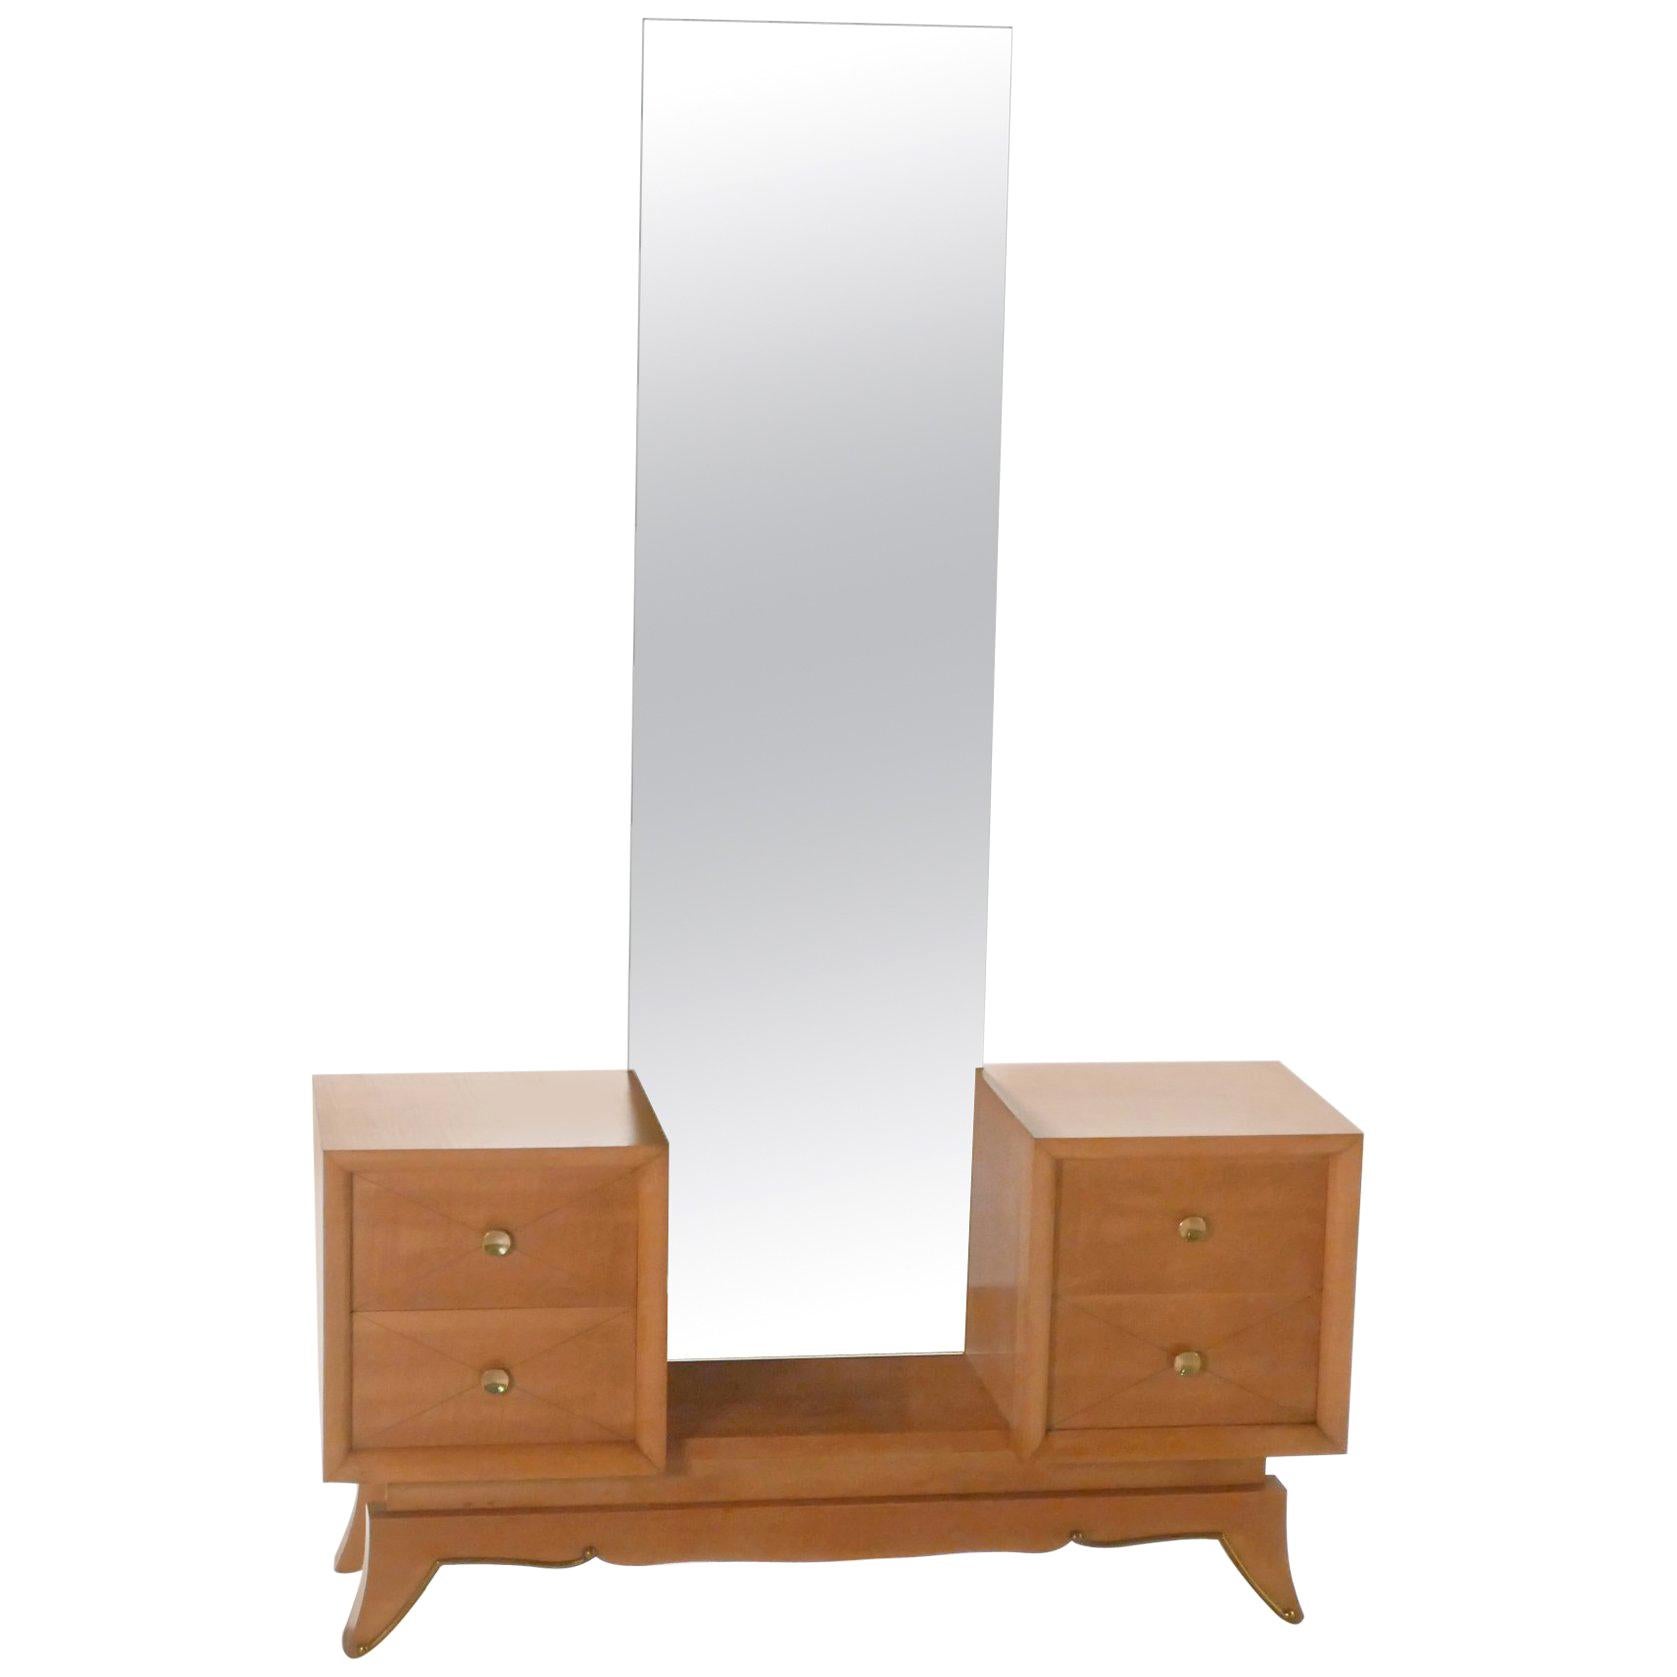 Warm sycamore maple, adorned with quality brass accents, is responsible for the cosy, romantic feeling that this piece effuses. The dressing table, with a strikingly tall mirror jutting up from its centre, is emblematic of renowned Art Deco designer